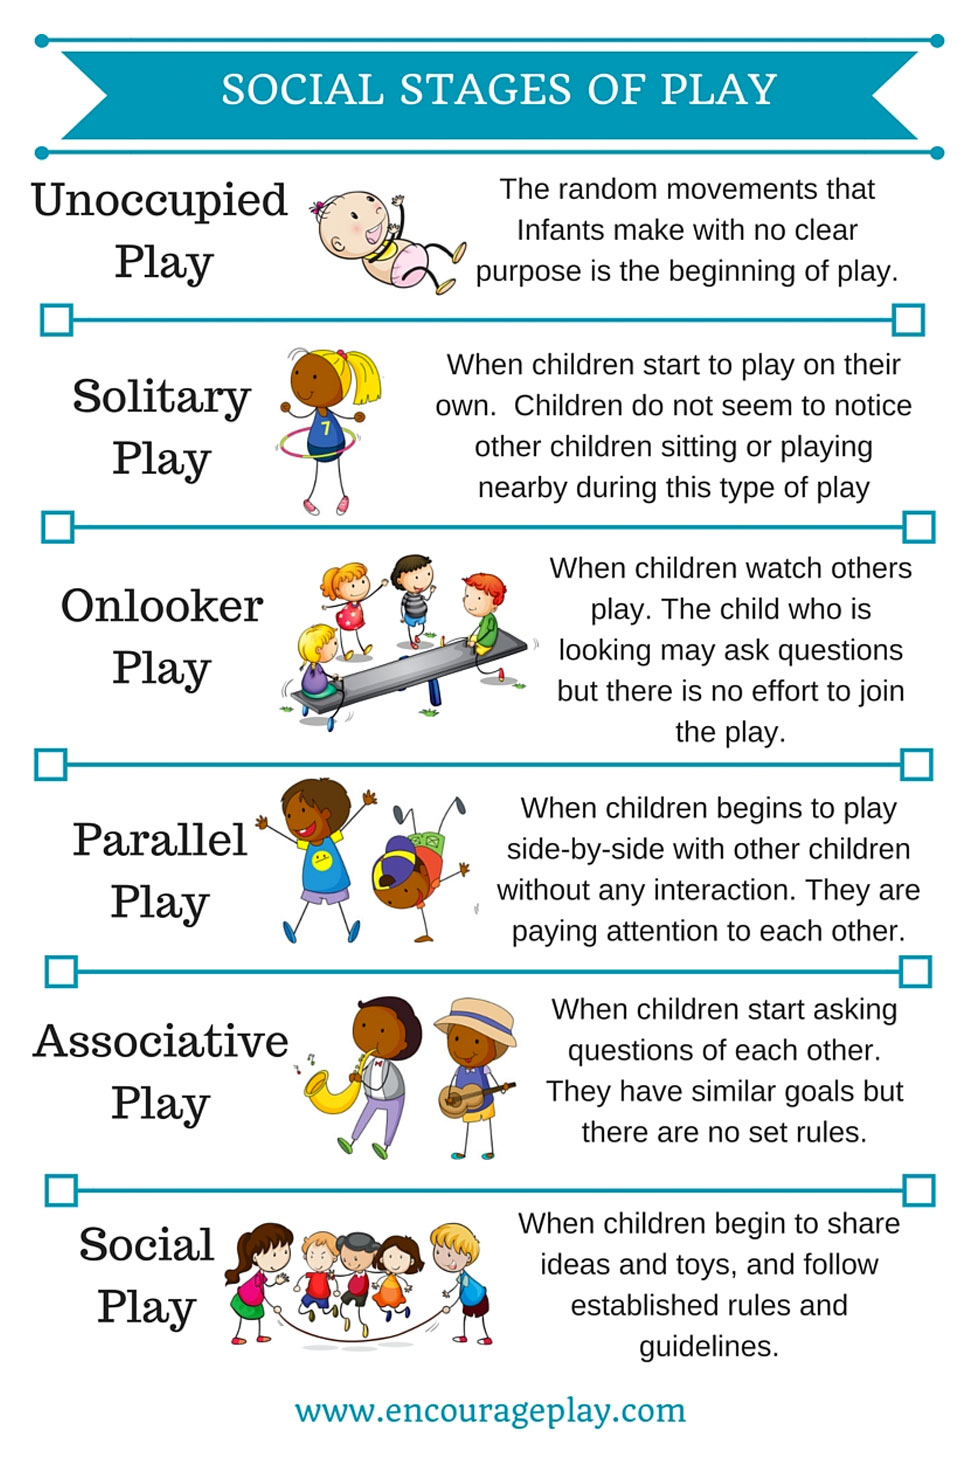 childminding-ireland-social-stages-of-play